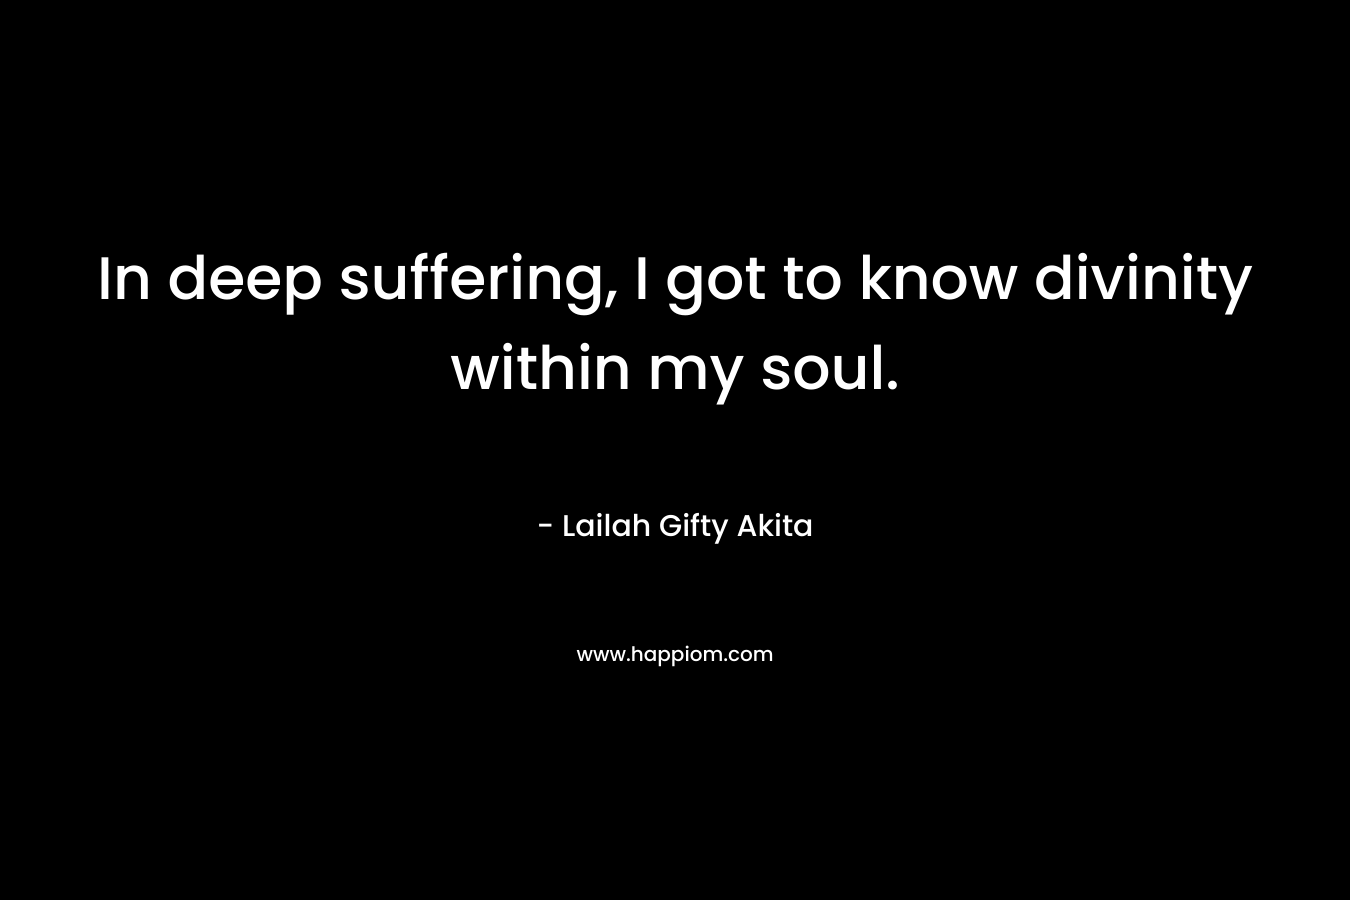 In deep suffering, I got to know divinity within my soul.